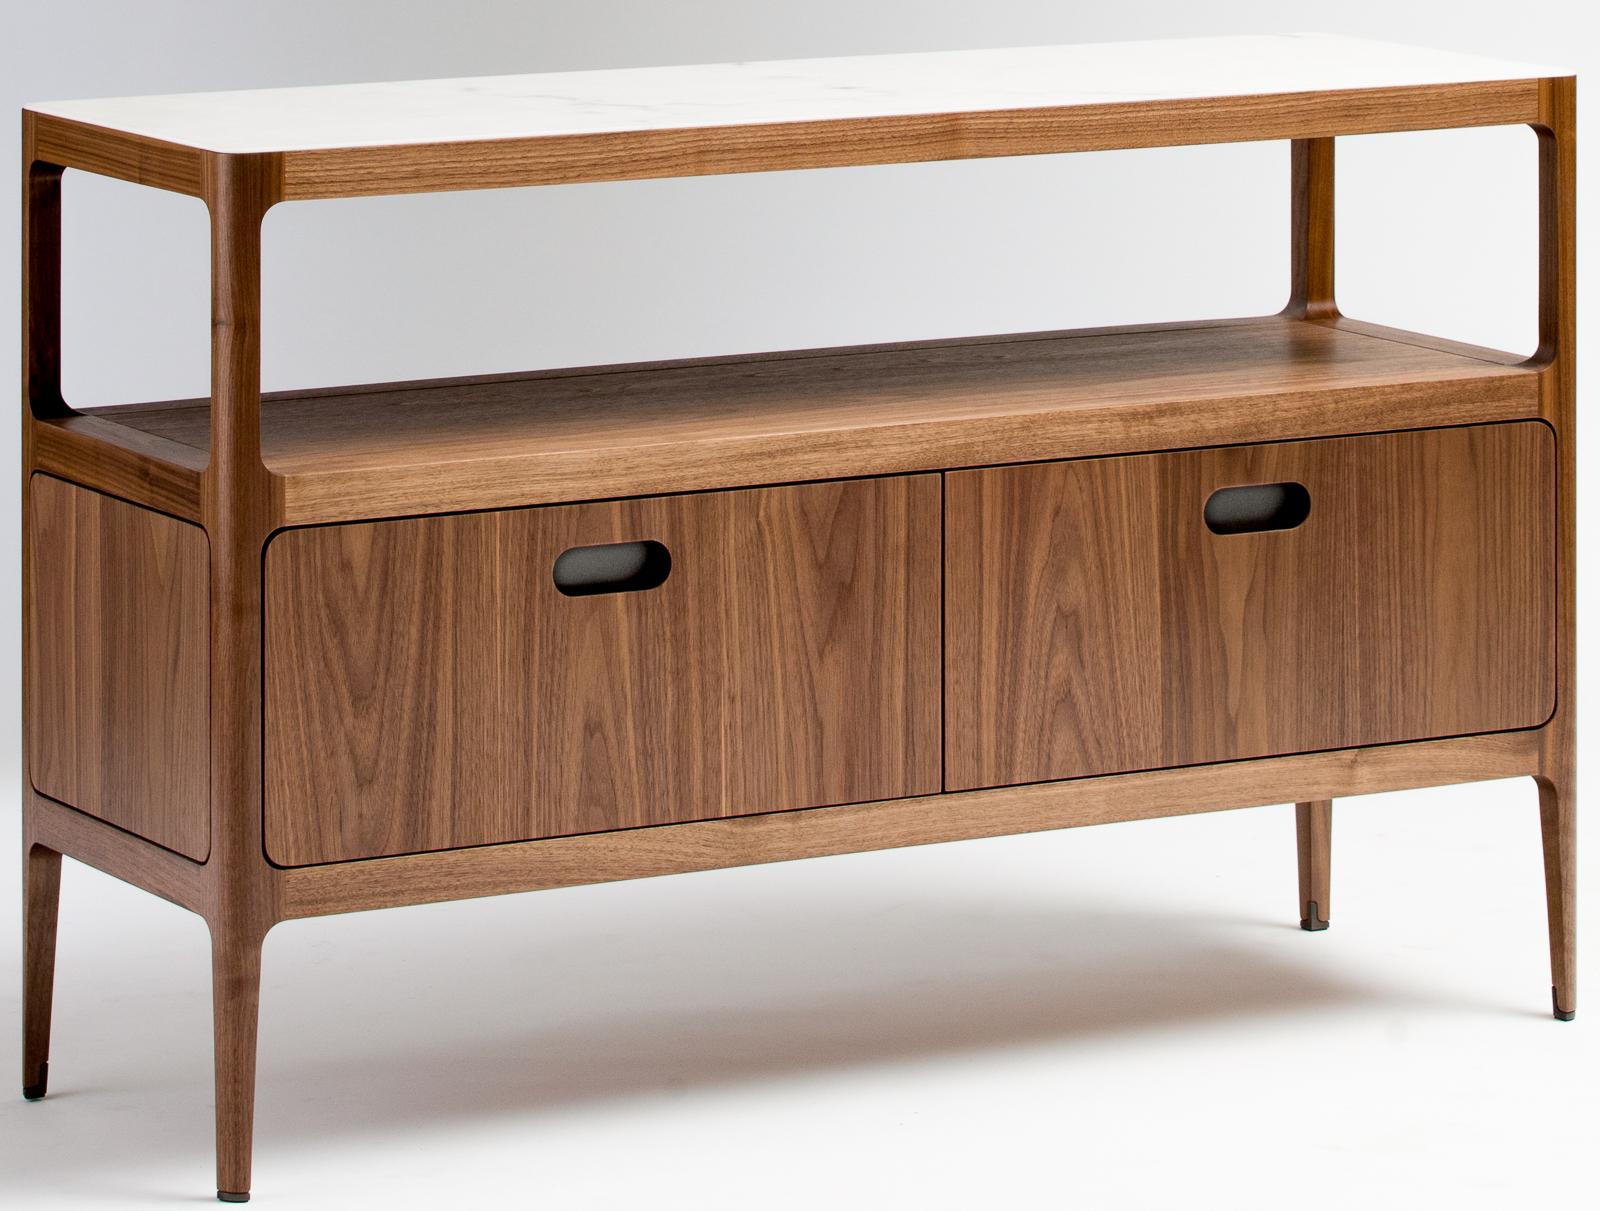 This credenza or sideboard designed and fabricated by Munson Furniture draws inspiration from mid-century designs and fits beautifully with both traditional and contemporary interiors. As shown, it has two 10 inch drawer faces. The shelf height is 8